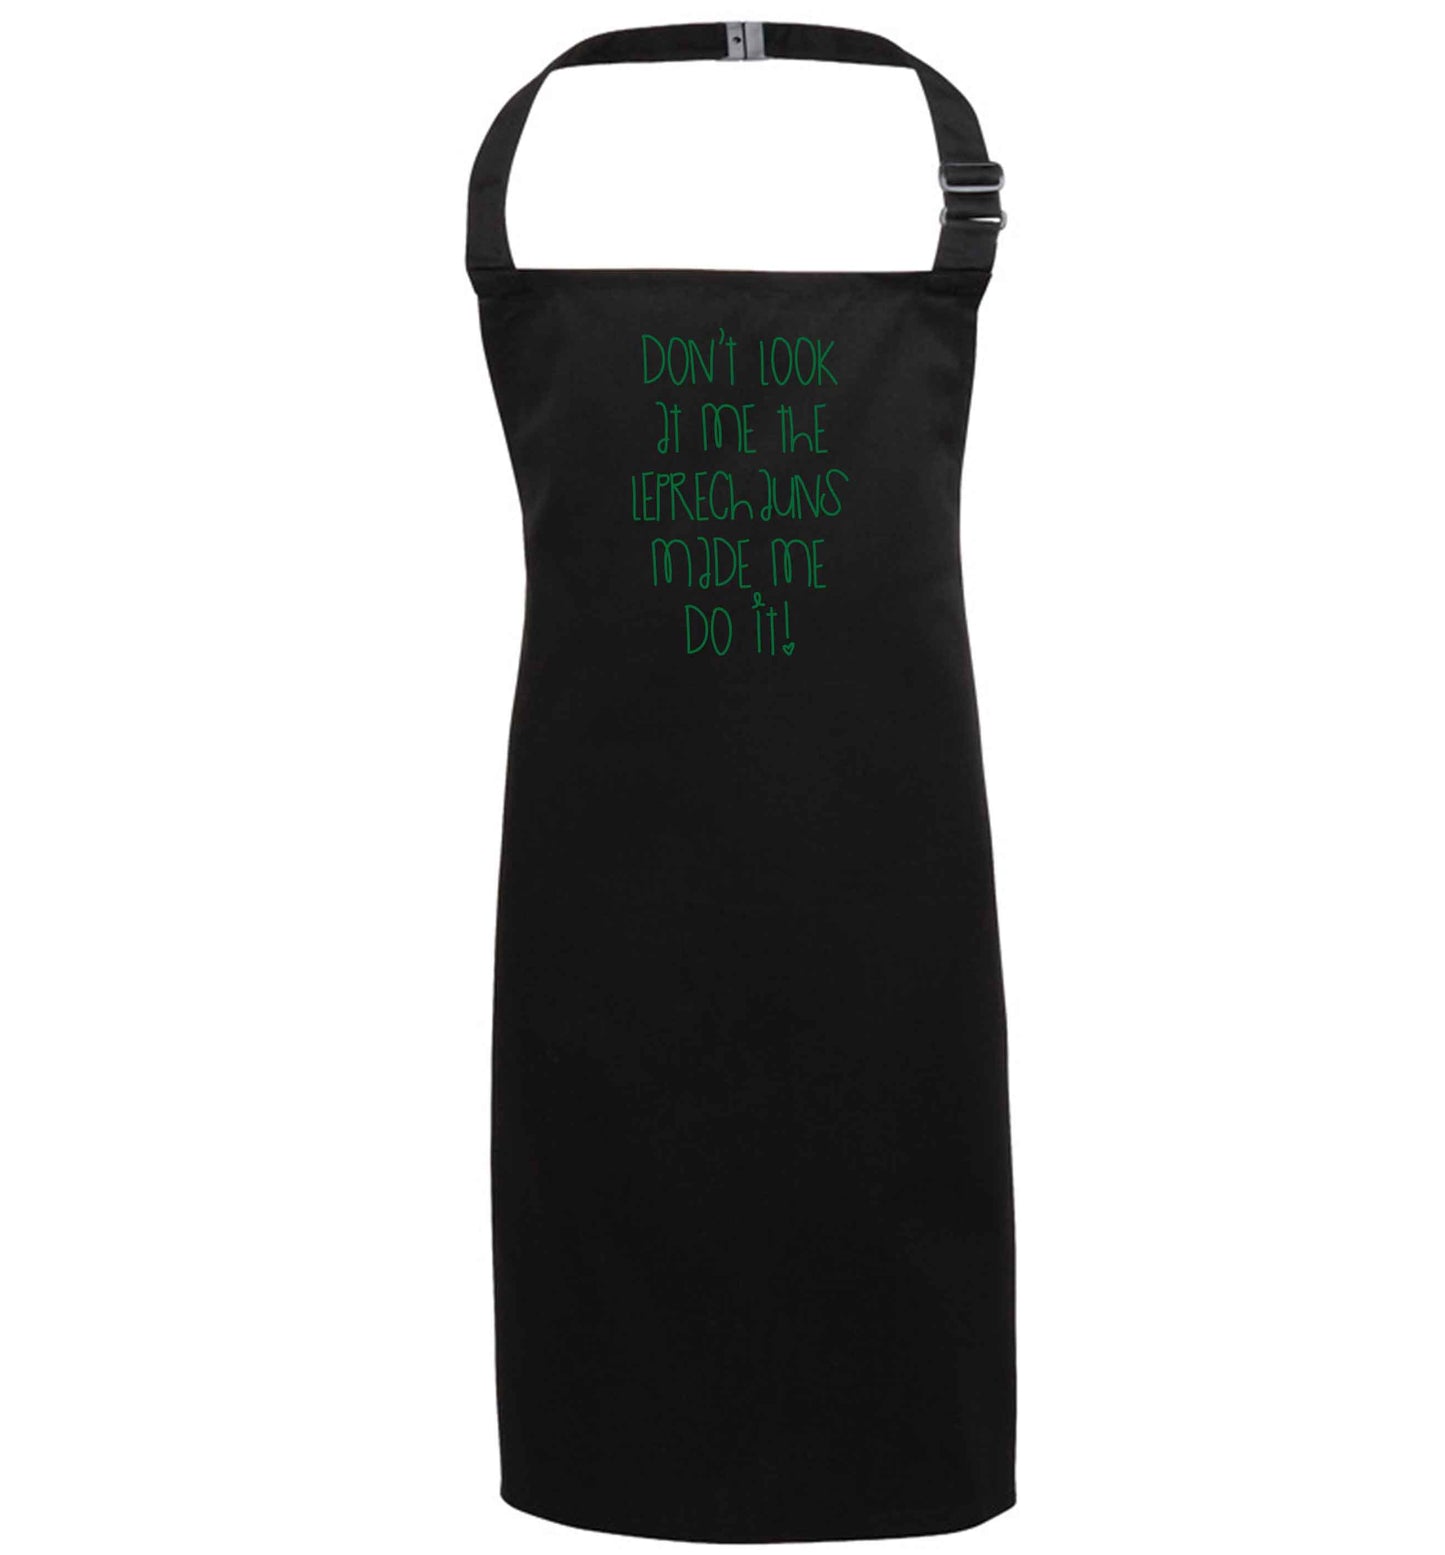 Don't look at me the leprechauns made me do it black apron 7-10 years